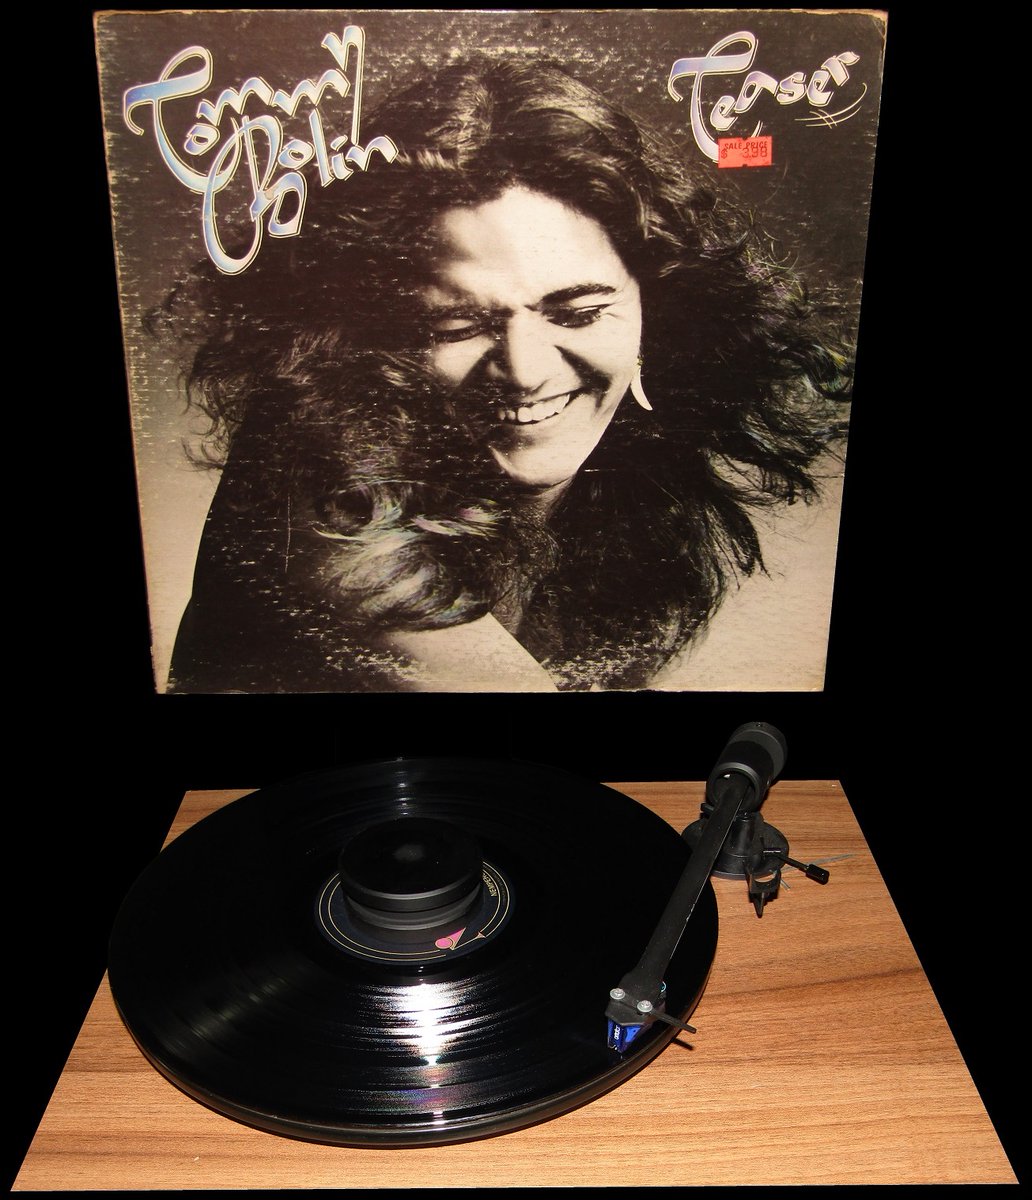 The late, great Tommy Bolin and his first solo album 'Teaser'.  If you haven't heard this, you probably should. #vinyladdict #vinylcollection #vinyljunkie #vinylreleases #vinylrecords #vinyllove #vinylcommunity #vinyl #nowspinning #NowPlaying